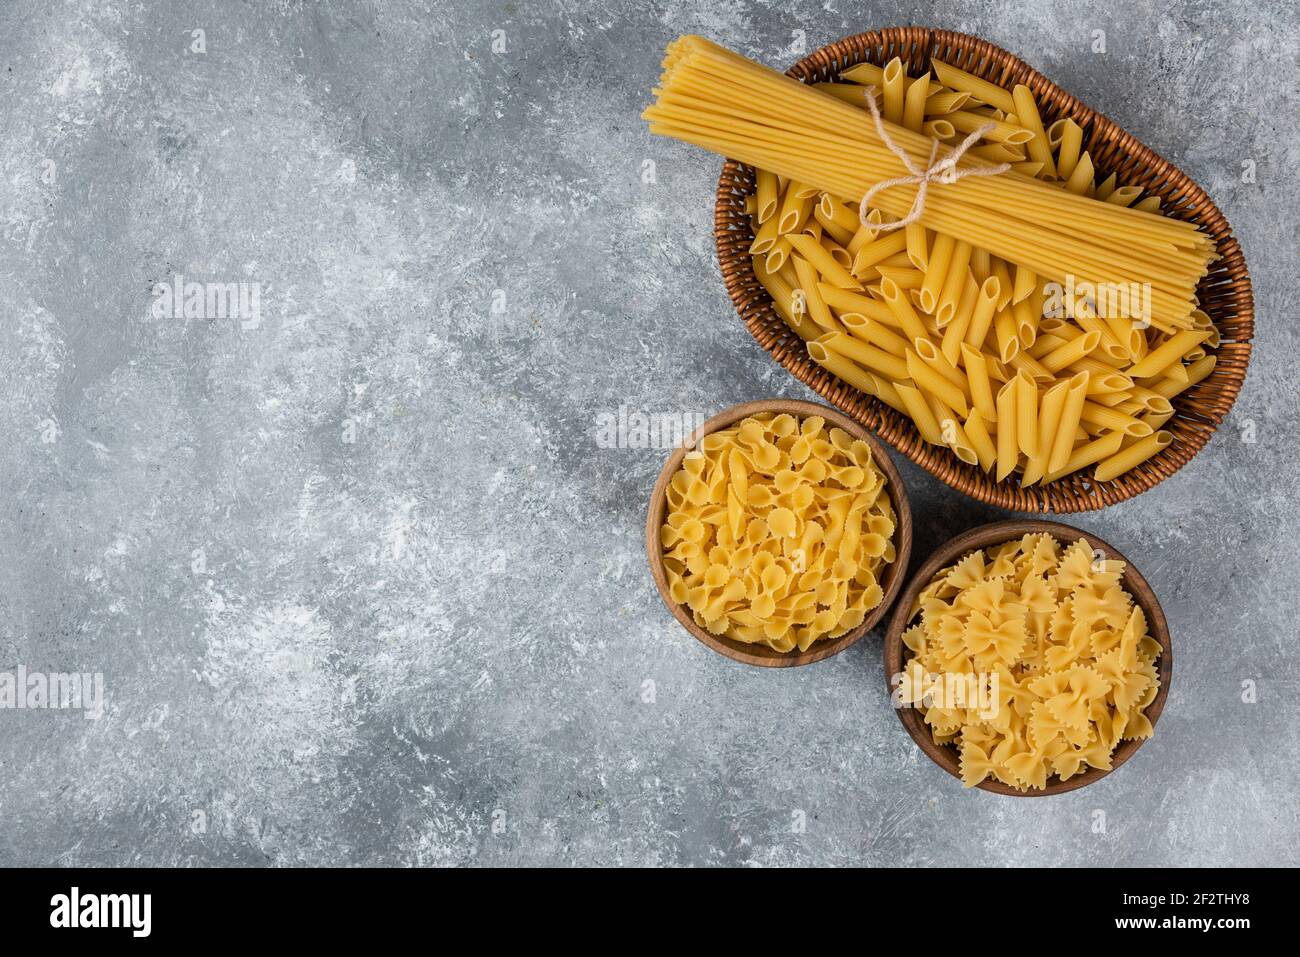 Pile of various uncooked dry pasta in wicker basket and wooden bowls Stock Photo